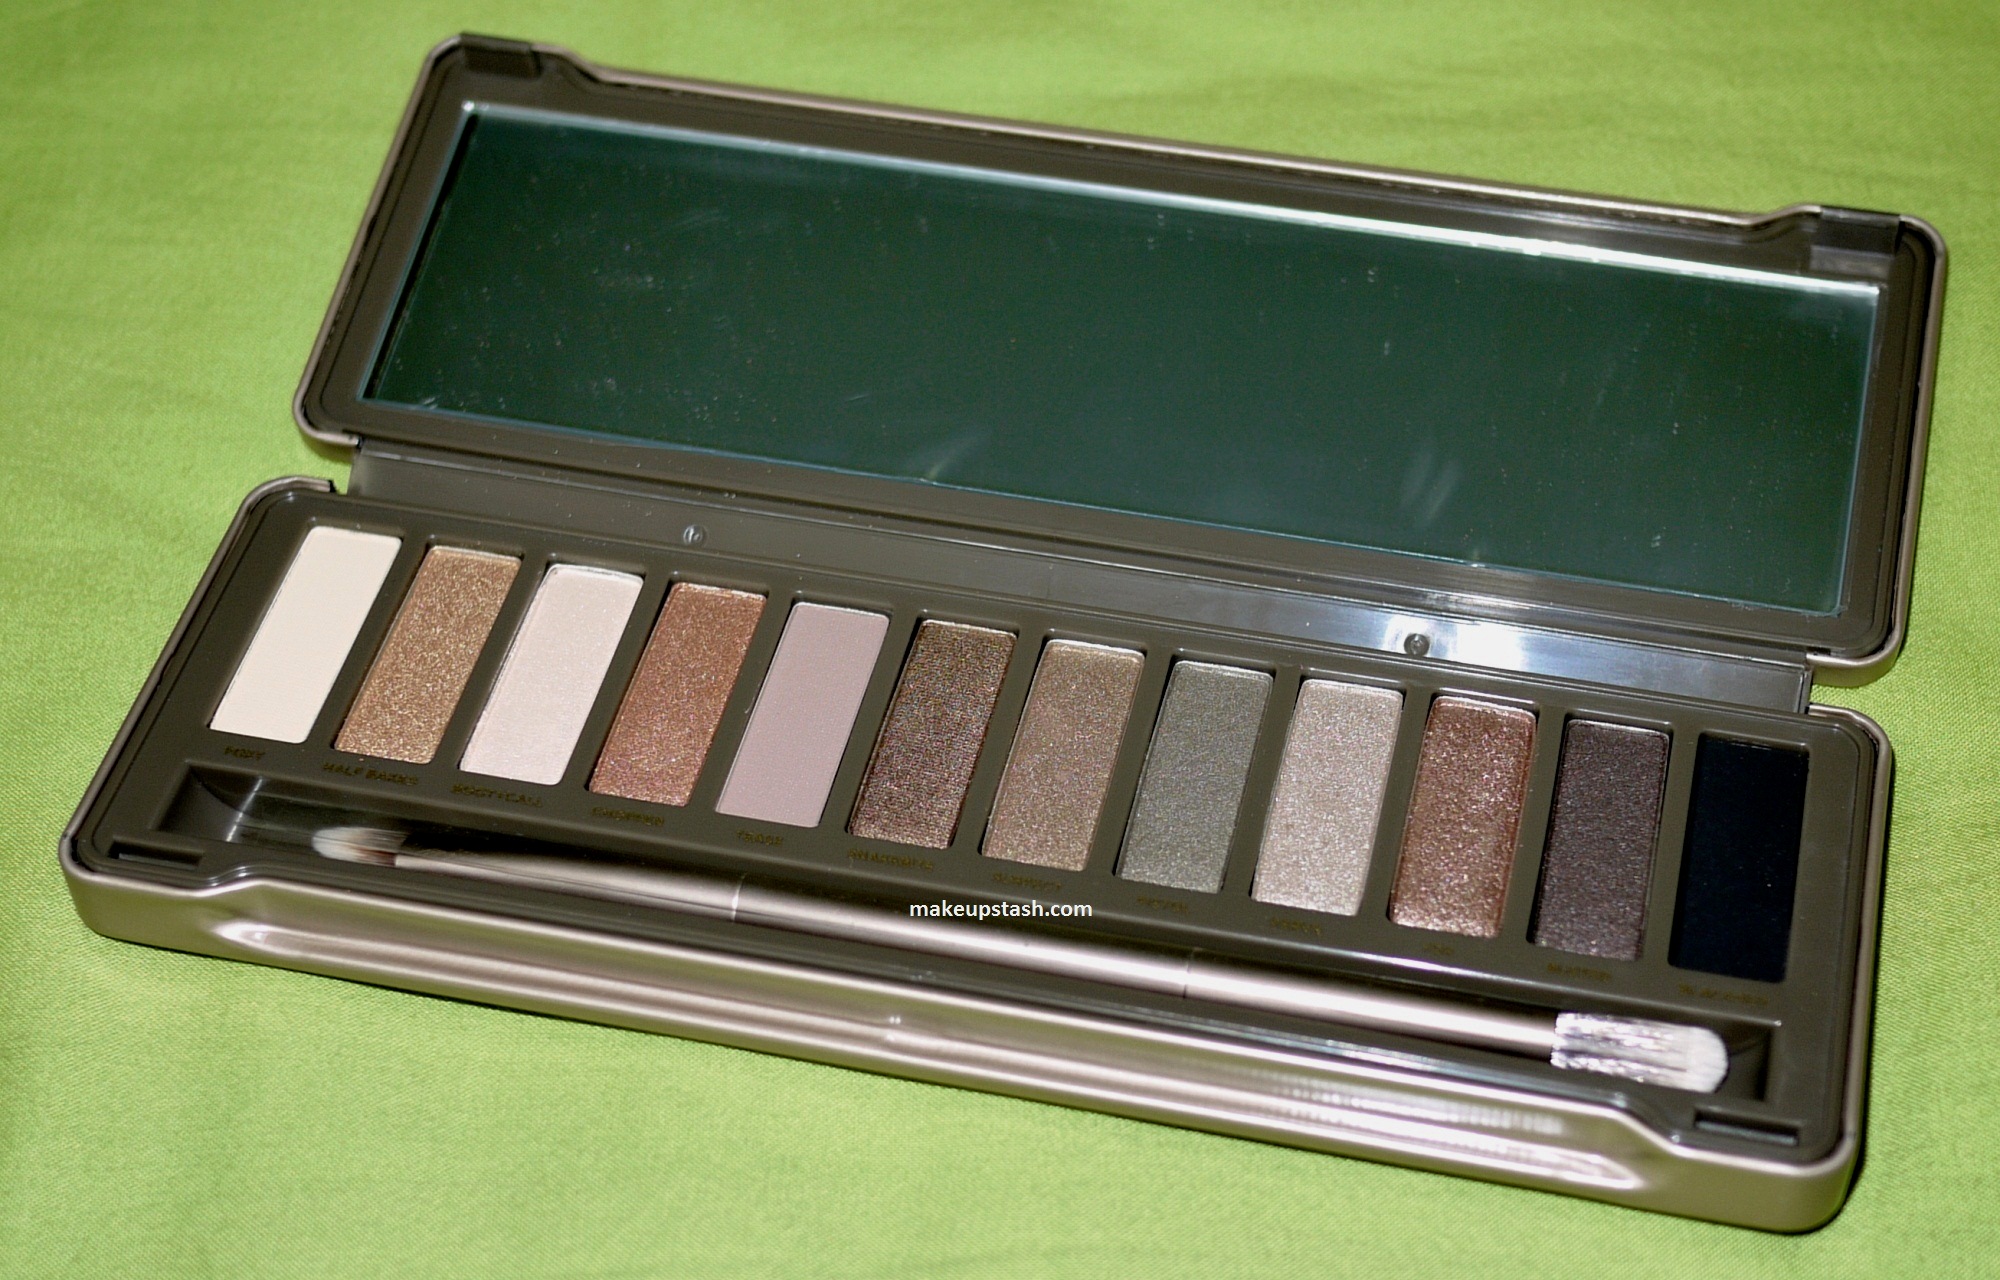 Beauty: Urban Decay Naked 2 palette review and 4 looks 